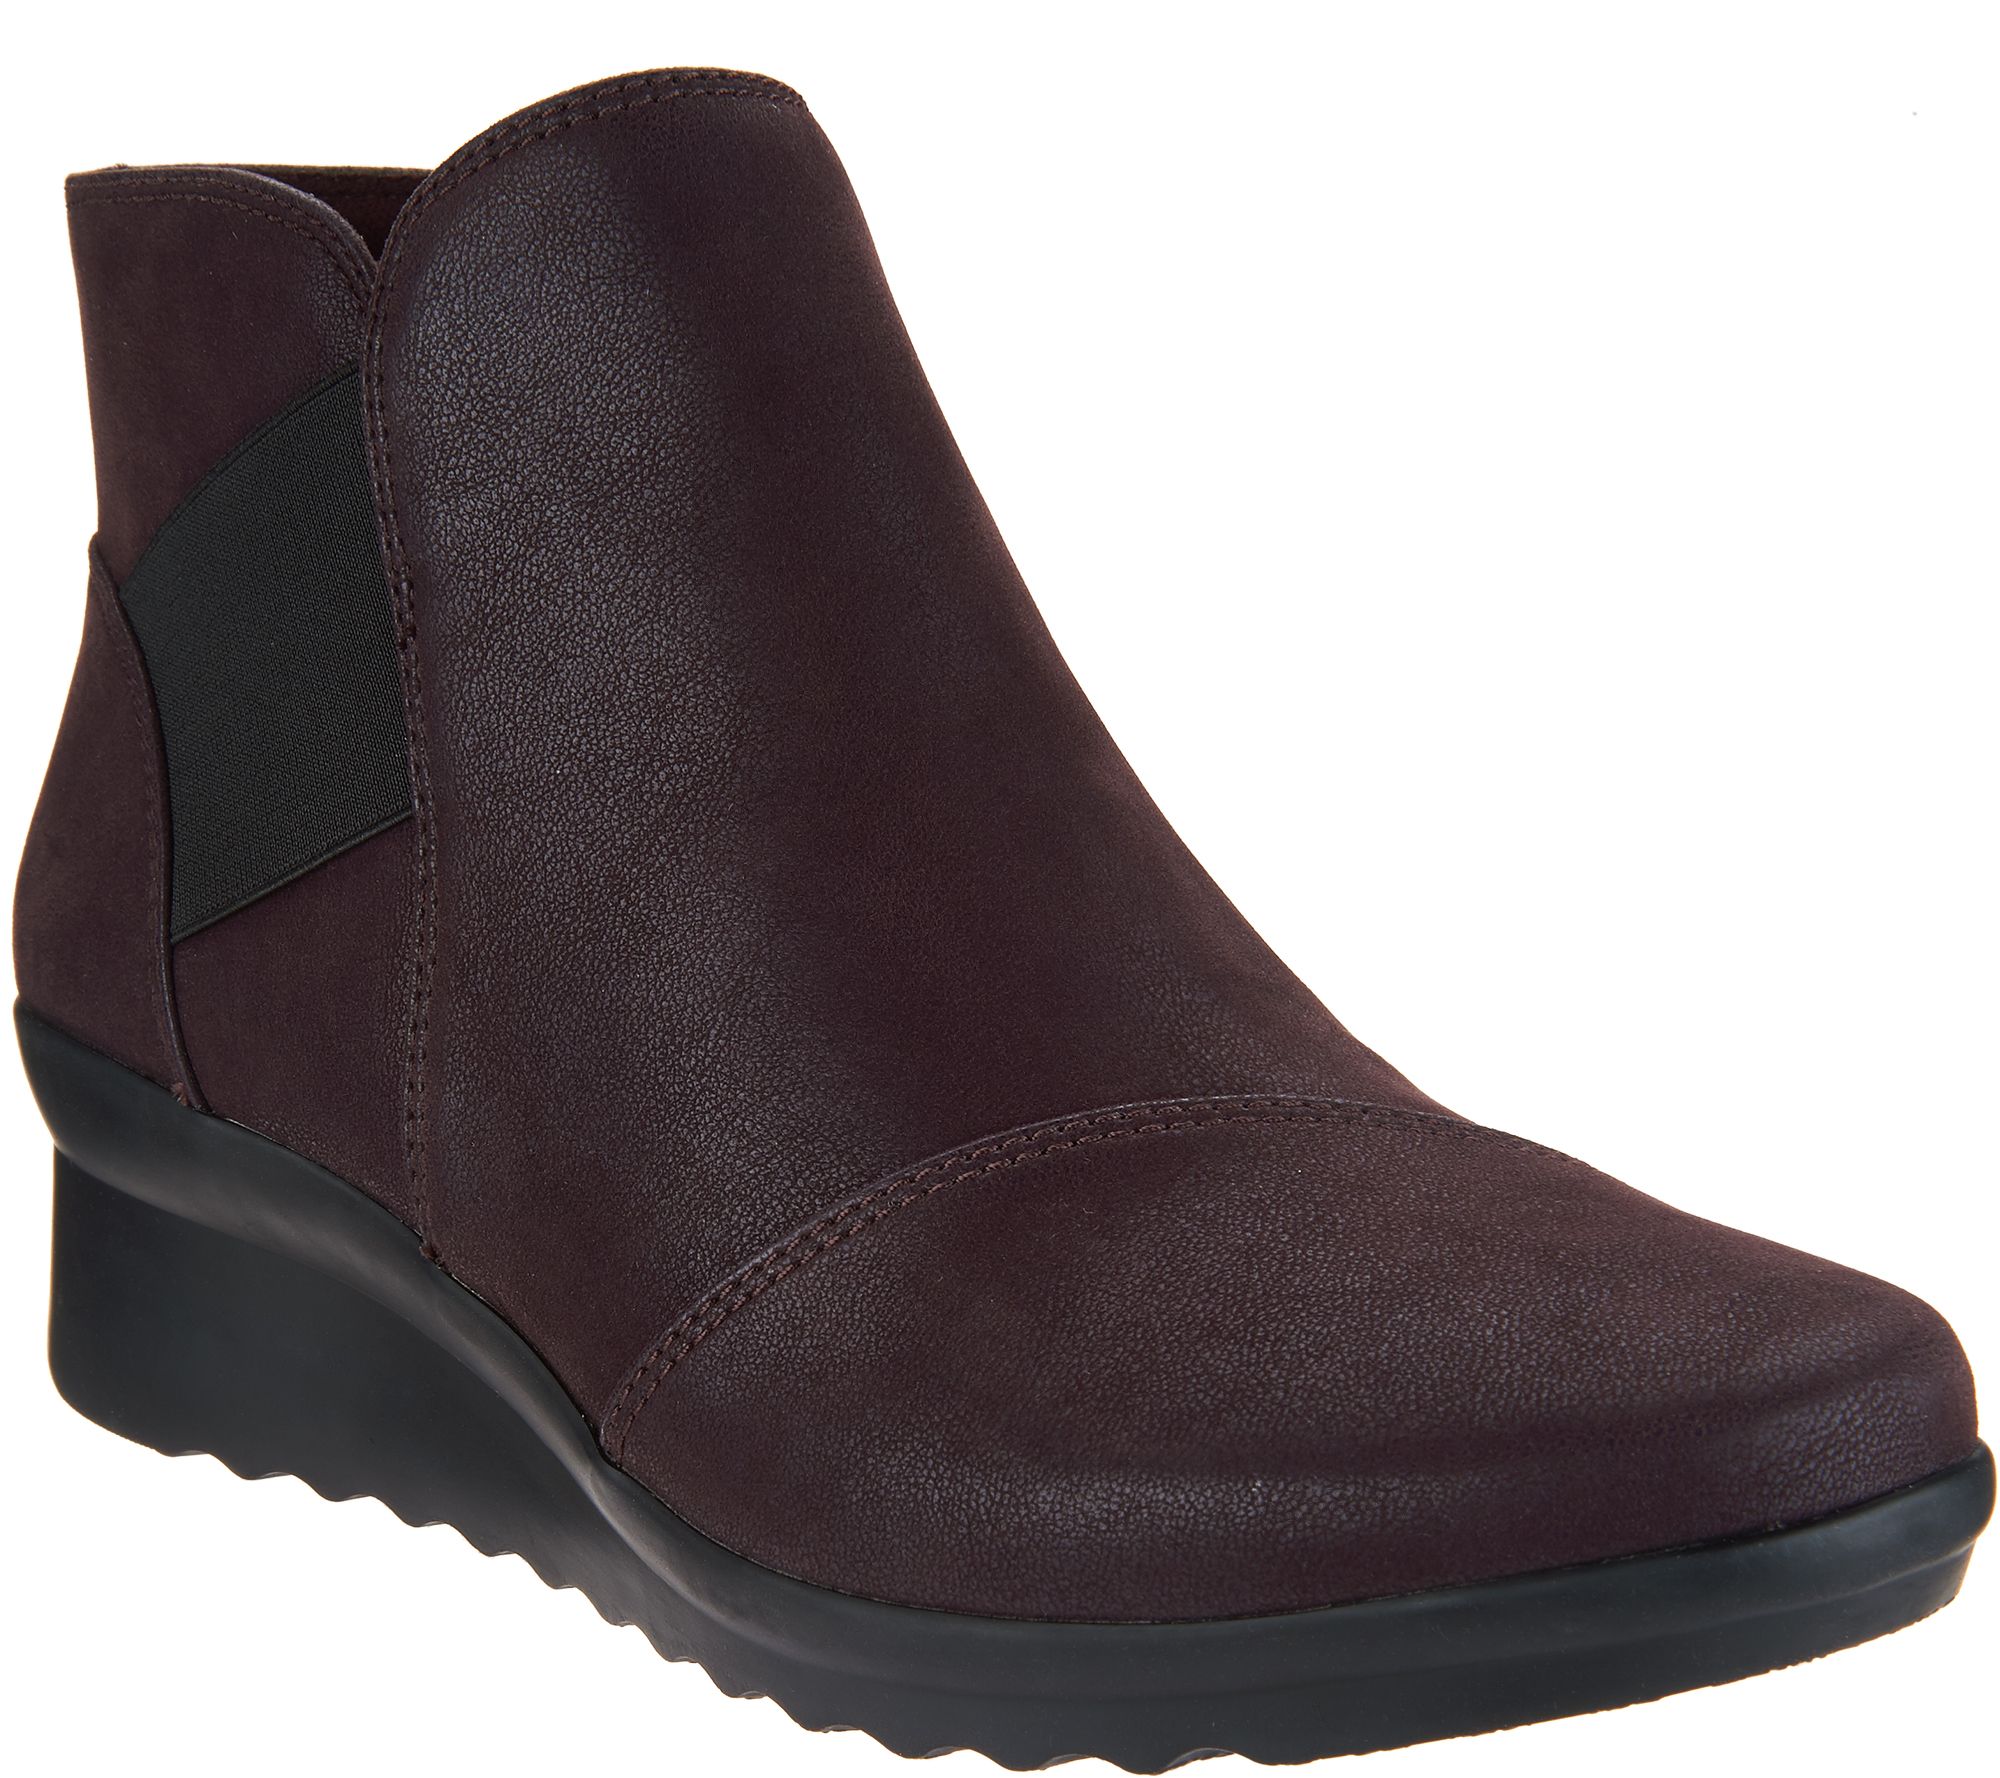 clarks cloudsteppers caddell tropic